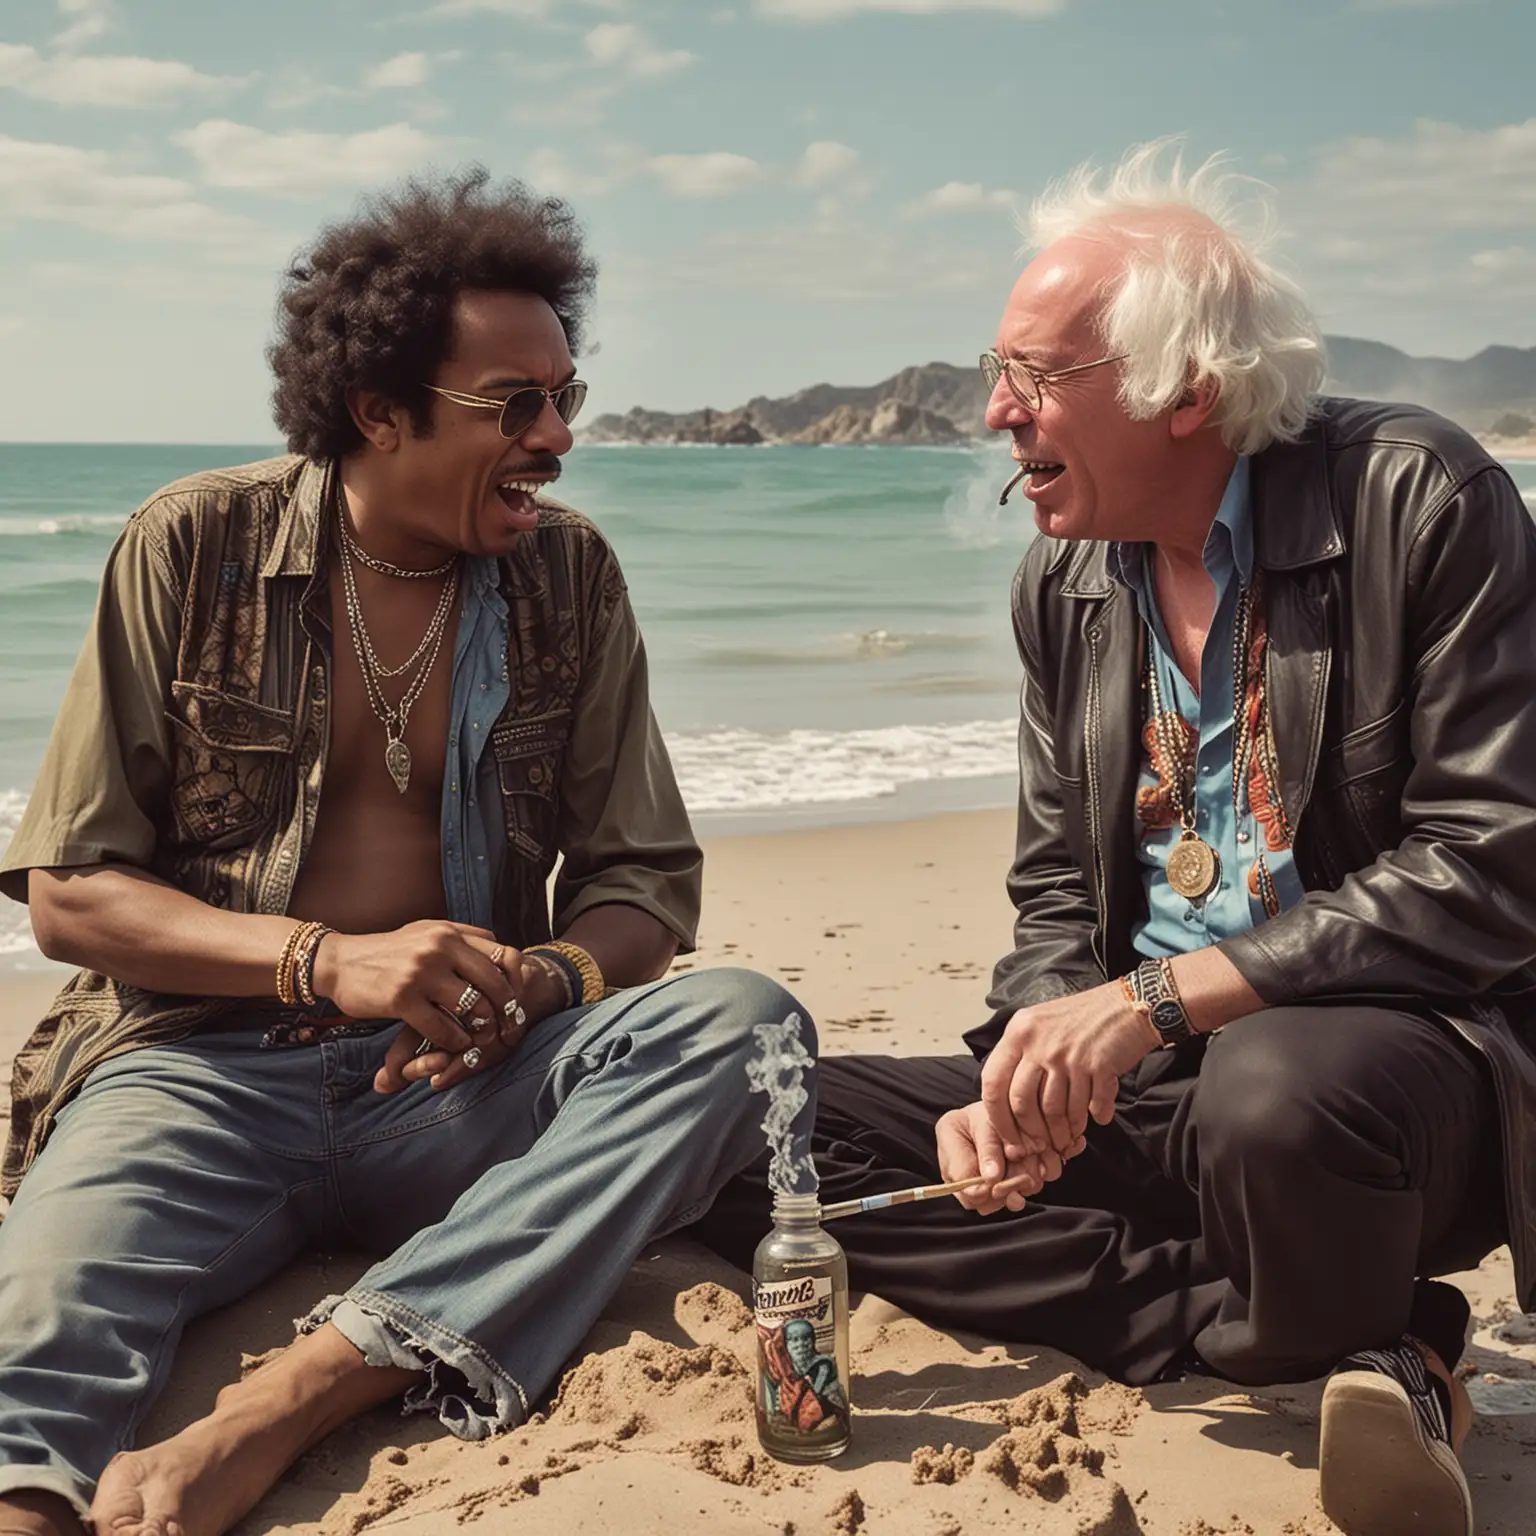 bernie sanders ripping a bong with jimi hendrix. they are sitting on the beach laughing as they get high.